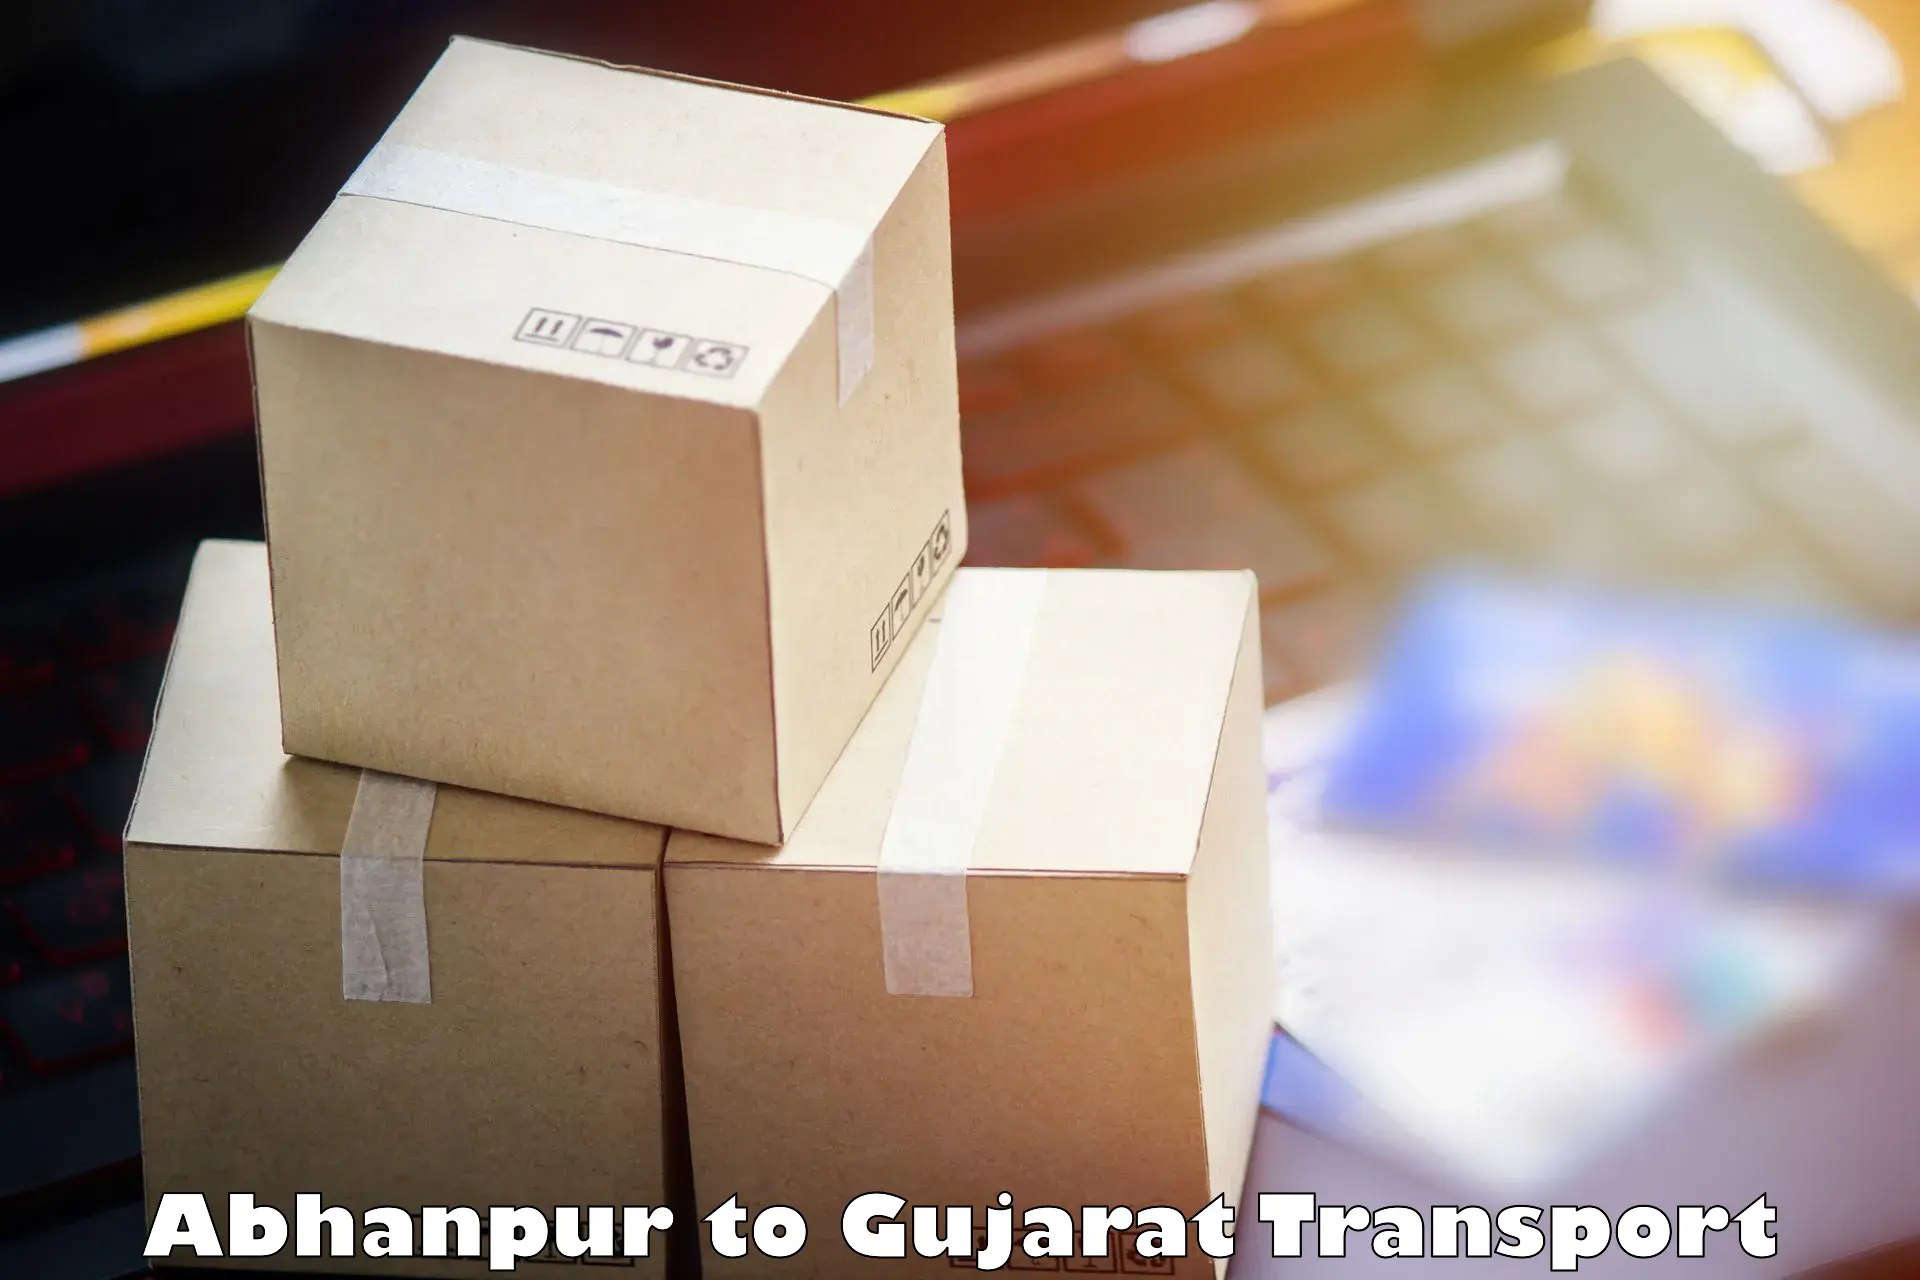 Air freight transport services Abhanpur to Bhuj